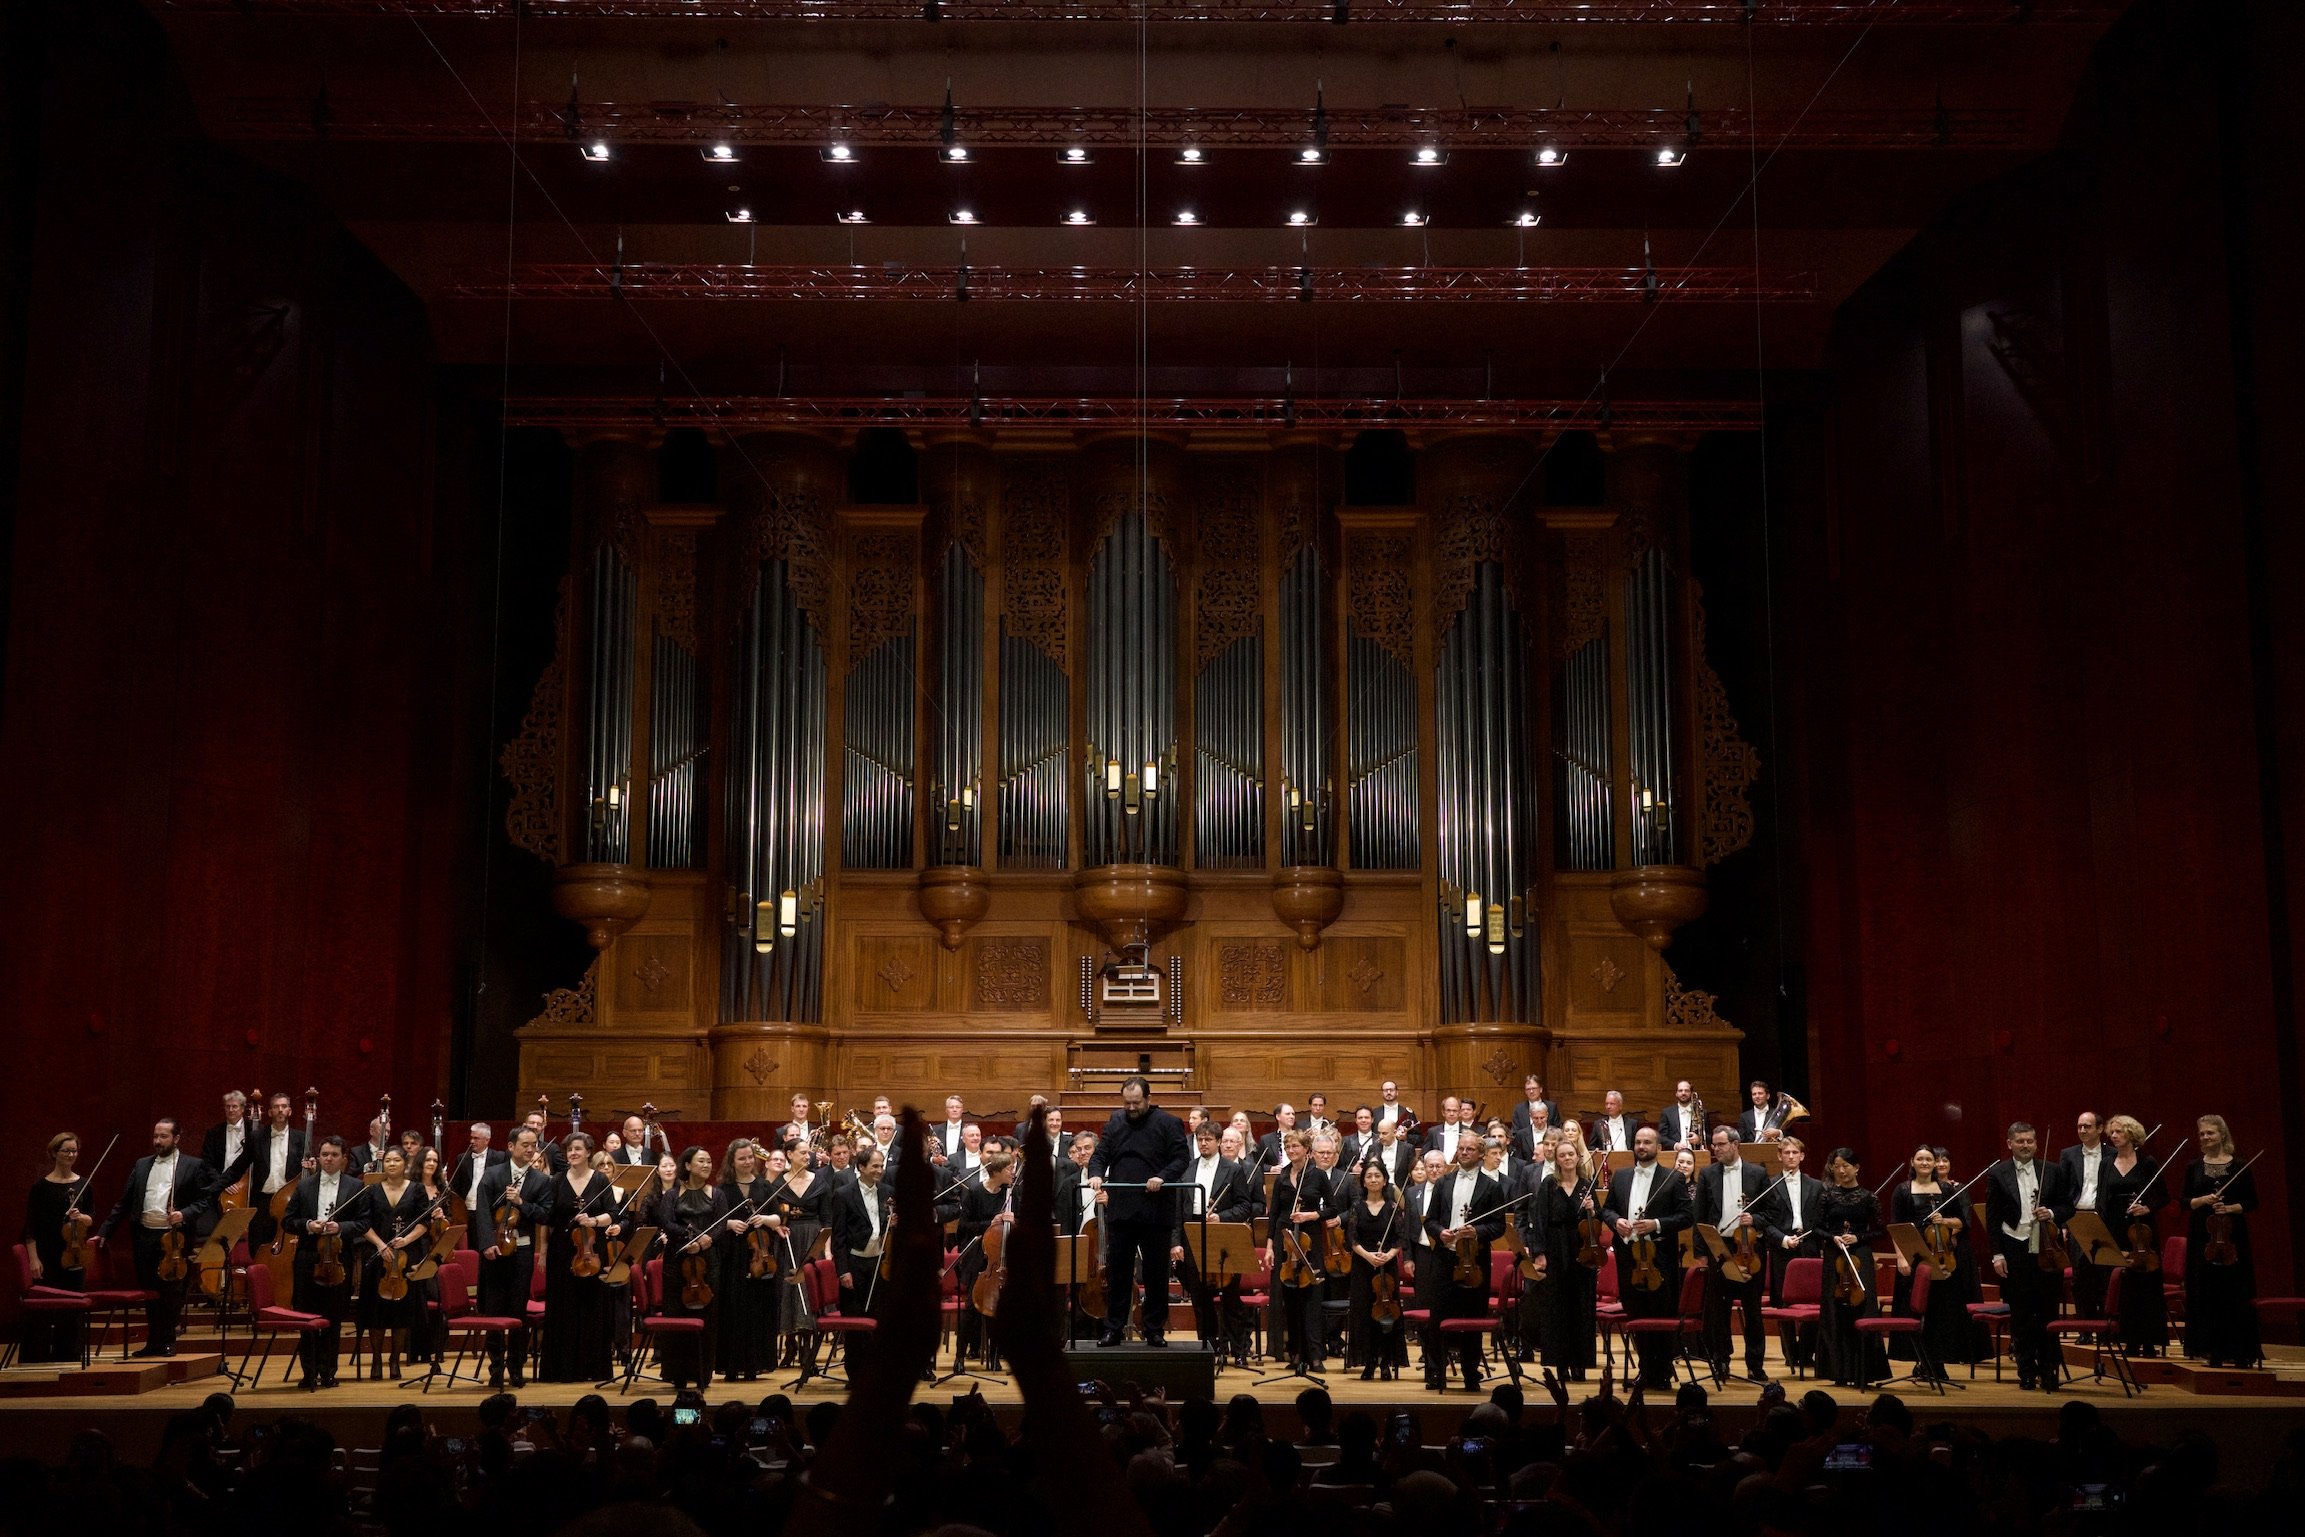 An orchestra and conductor at the center of the stage at the closing of a performance